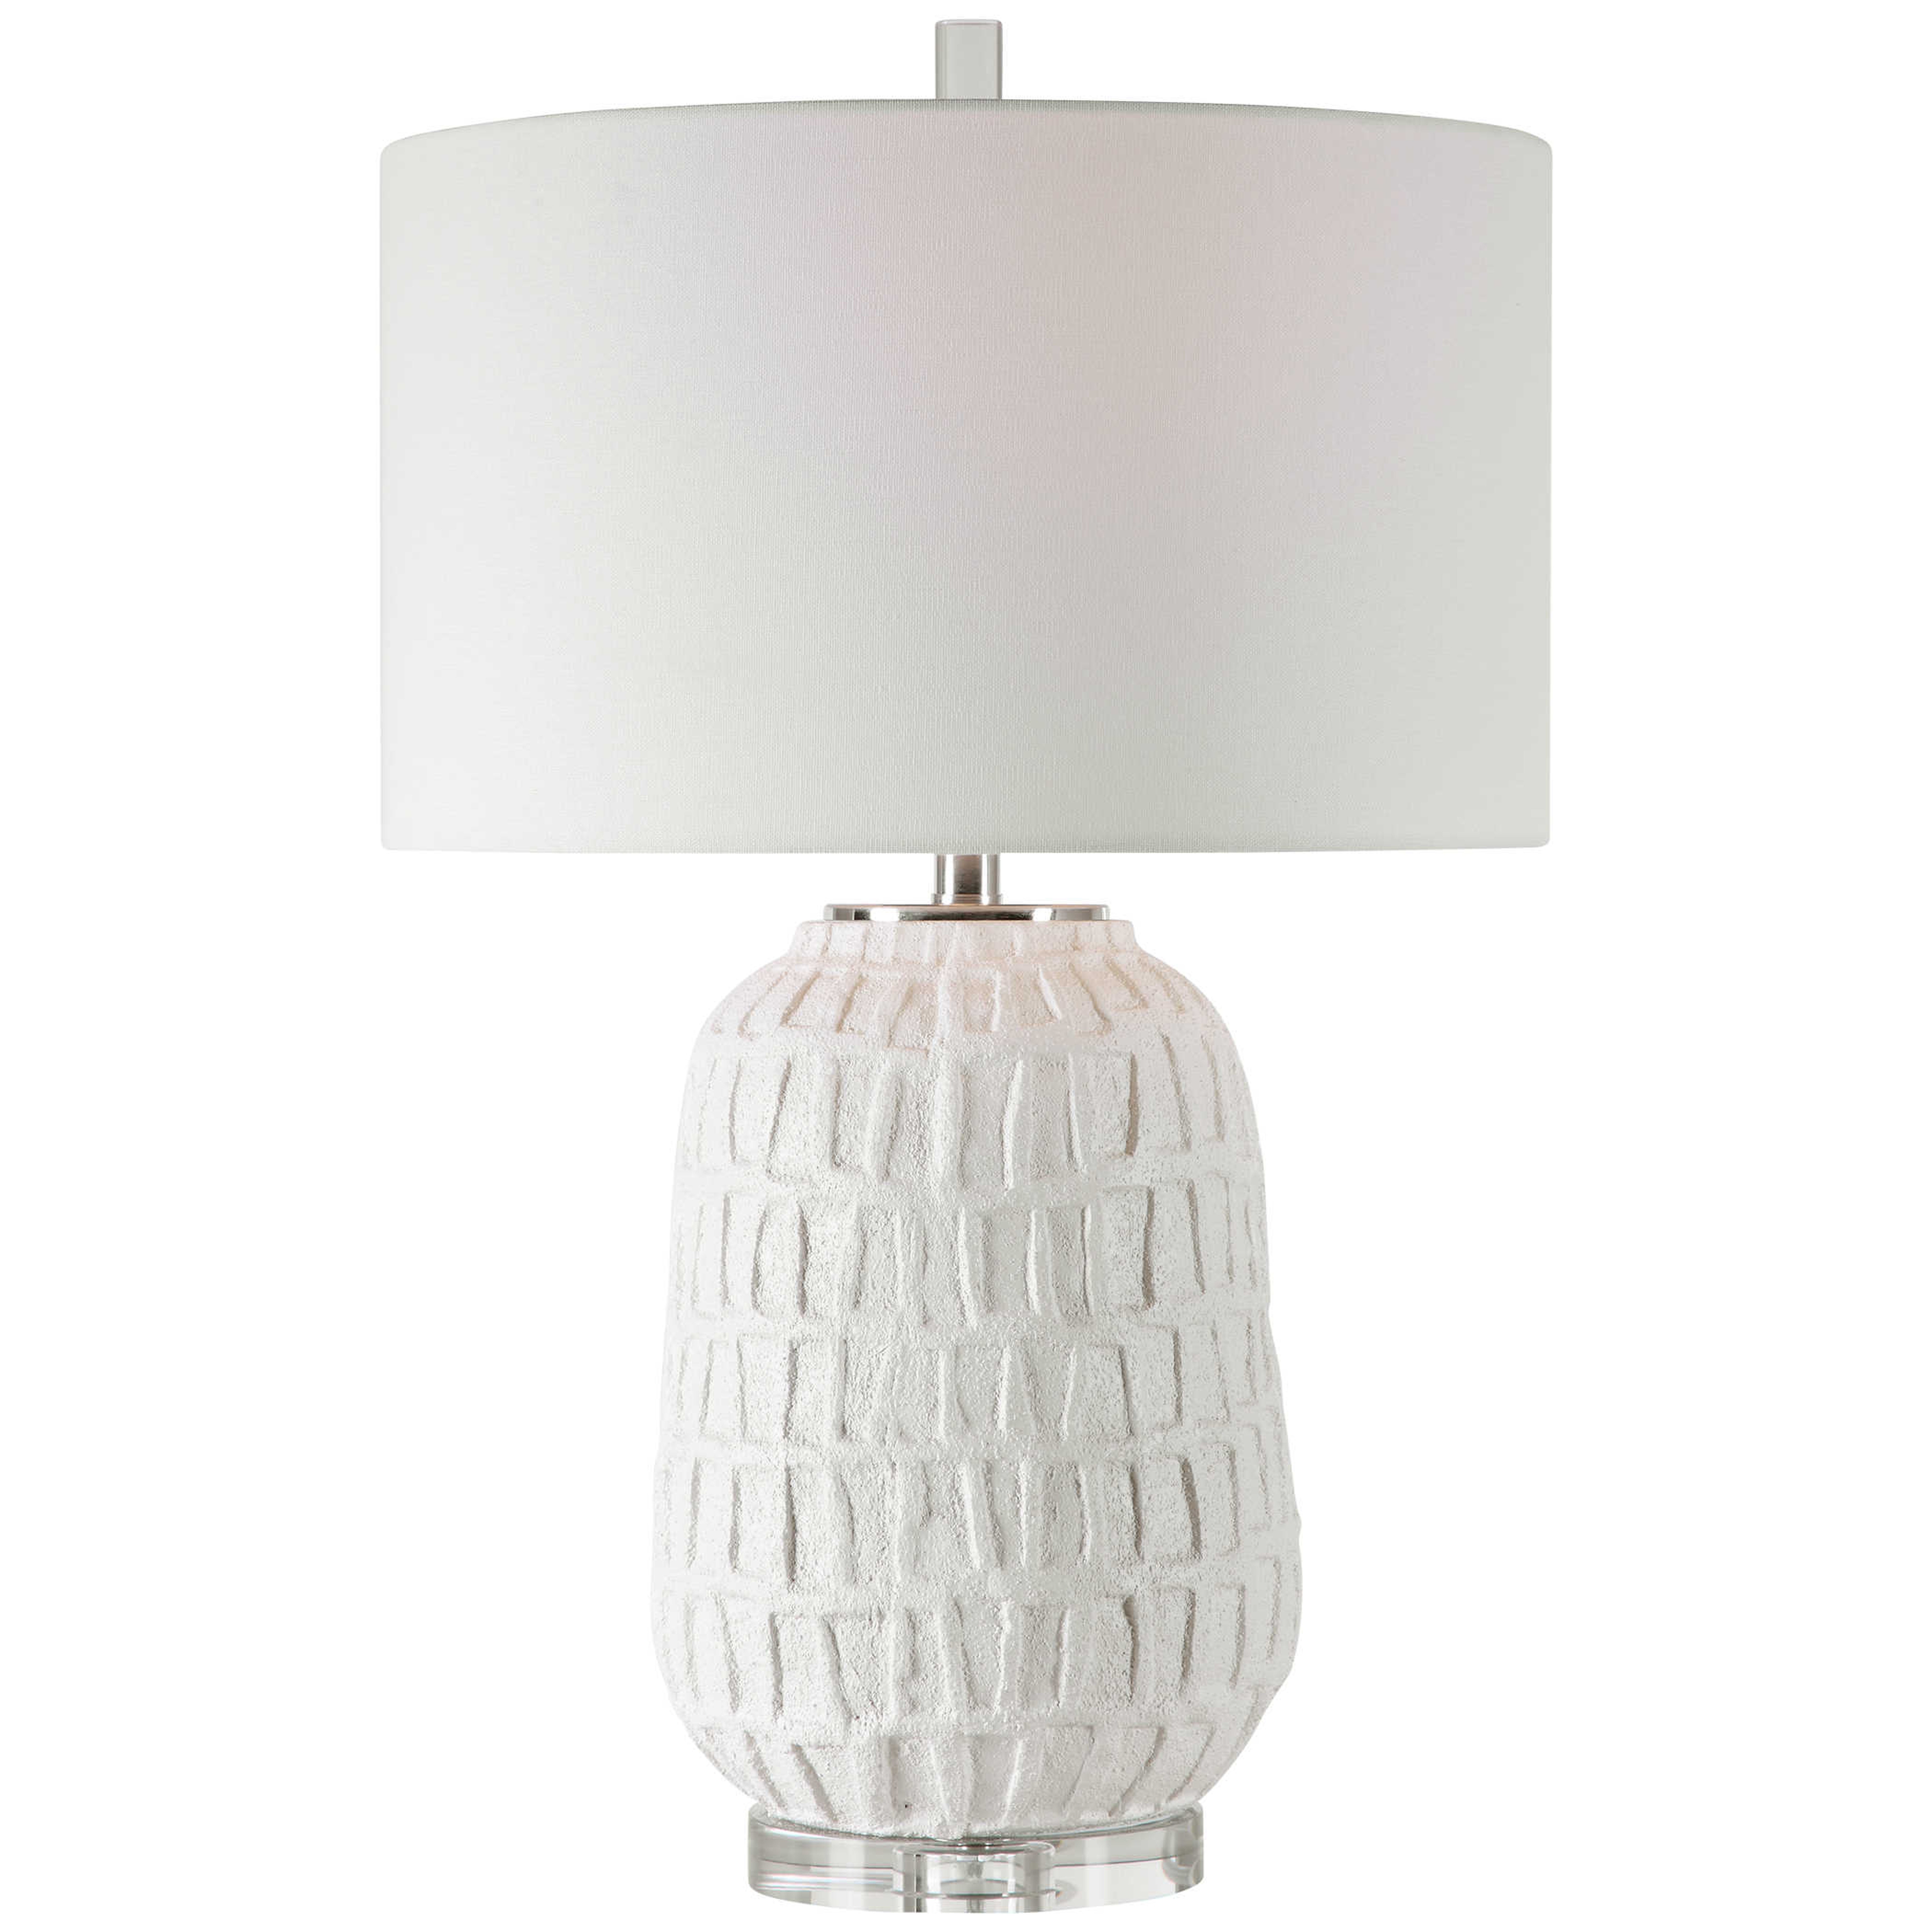 Caelina Textured Table Lamp, White - Hudsonhill Foundry